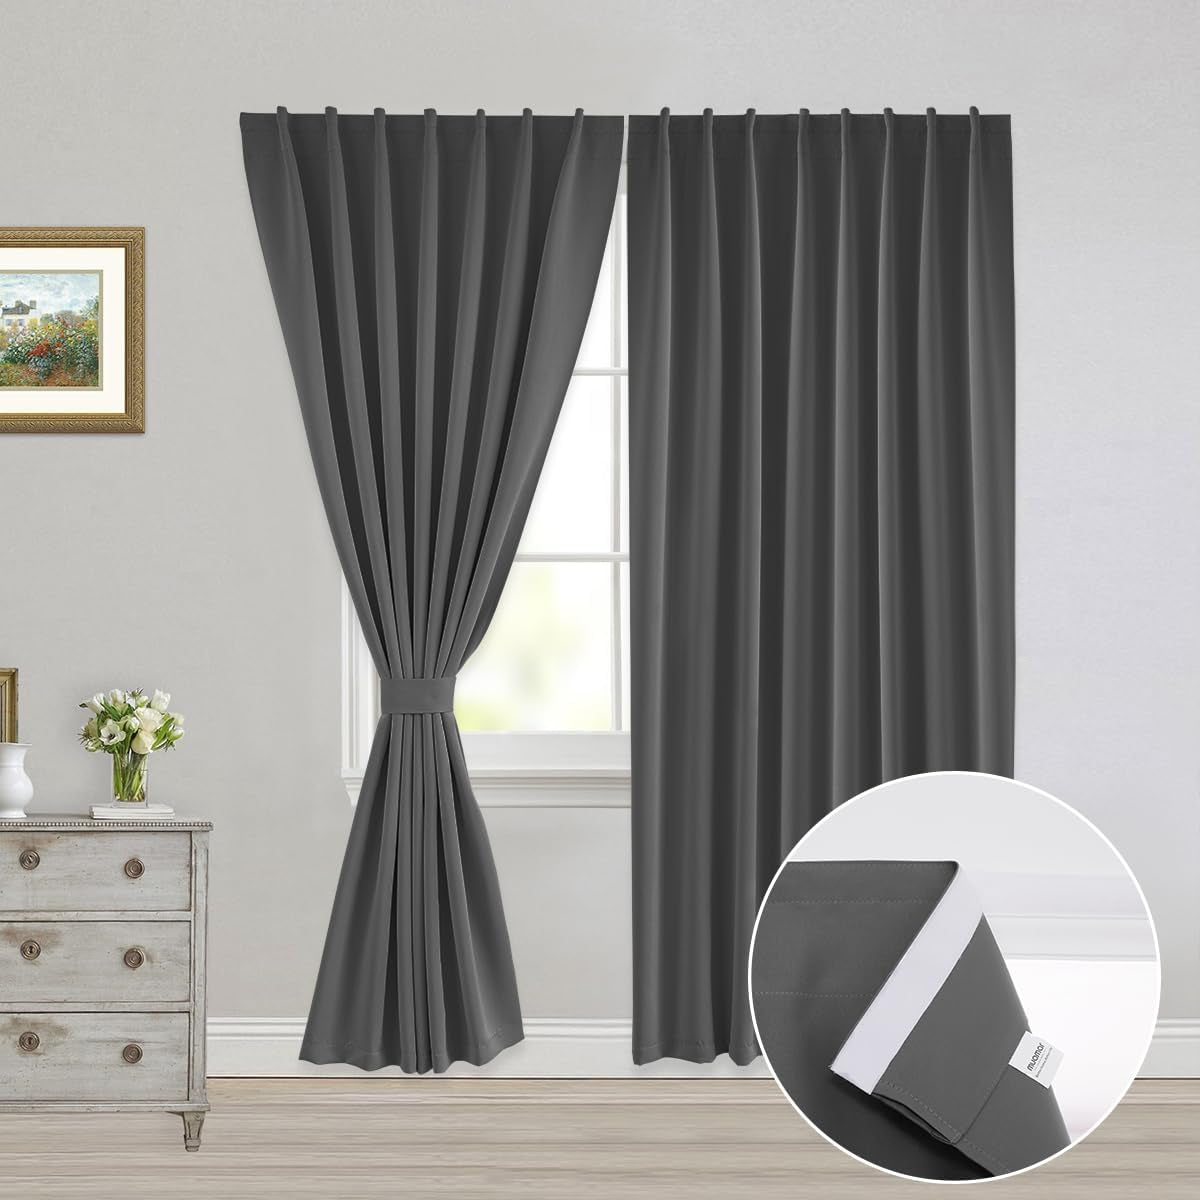 Muamar 2Pcs Blackout Curtains Privacy Curtains 63 Inch Length Window Curtains,Easy Install Thermal Insulated Window Shades,Stick Curtains No Rods, Black 42" W X 63" L  Muamar Grey 52"W X 84"L 